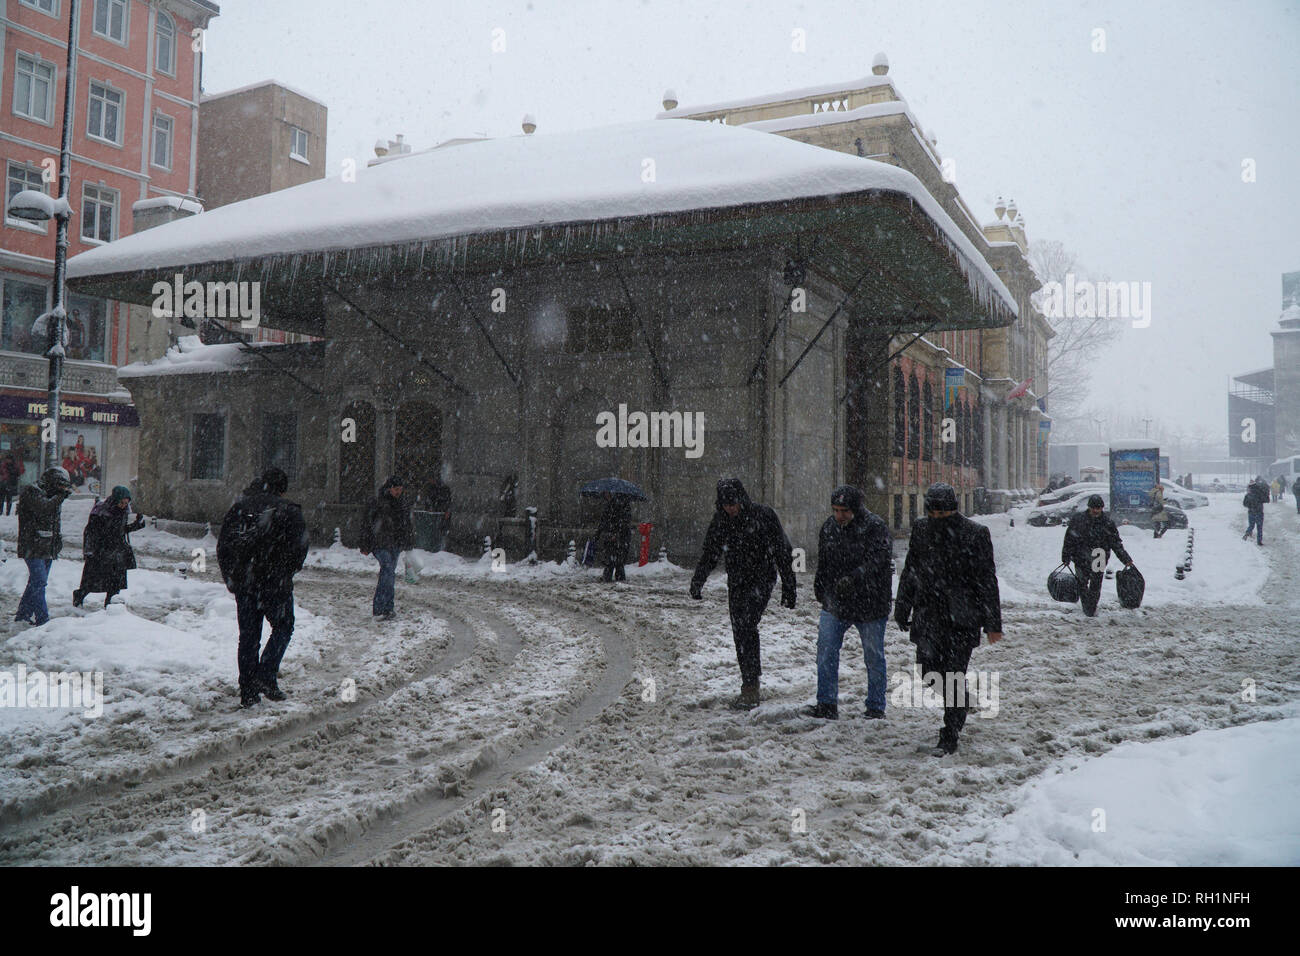 Istanbul, Eminonu, Turkey - January 9, 2017: Istanbul was covered with snow.There were people at the streets of The Eminonu with a fountain. Stock Photo